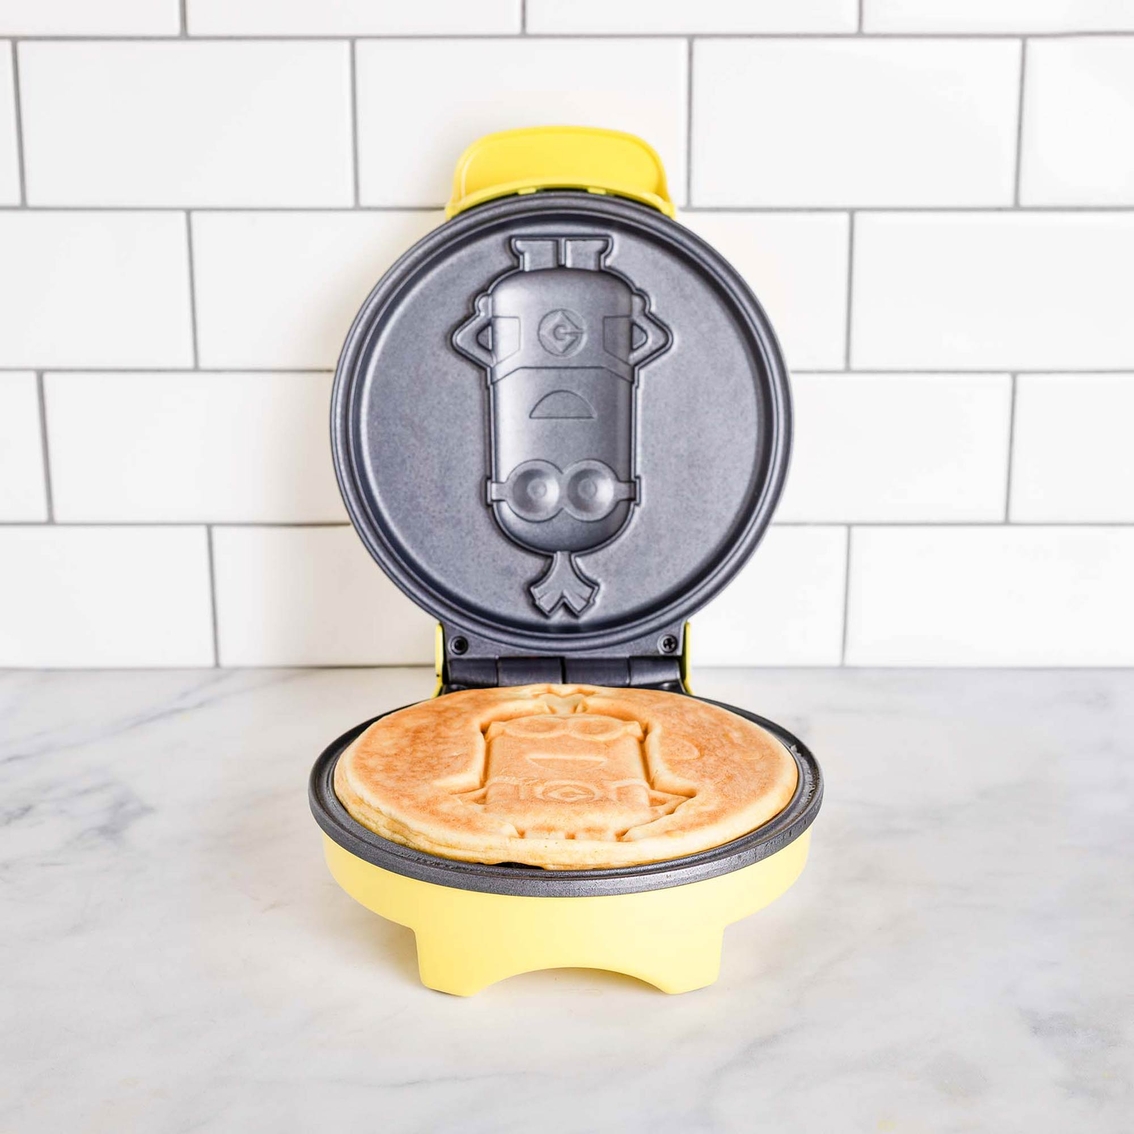 Minions Kevin Round Waffle Maker - Image 7 of 10